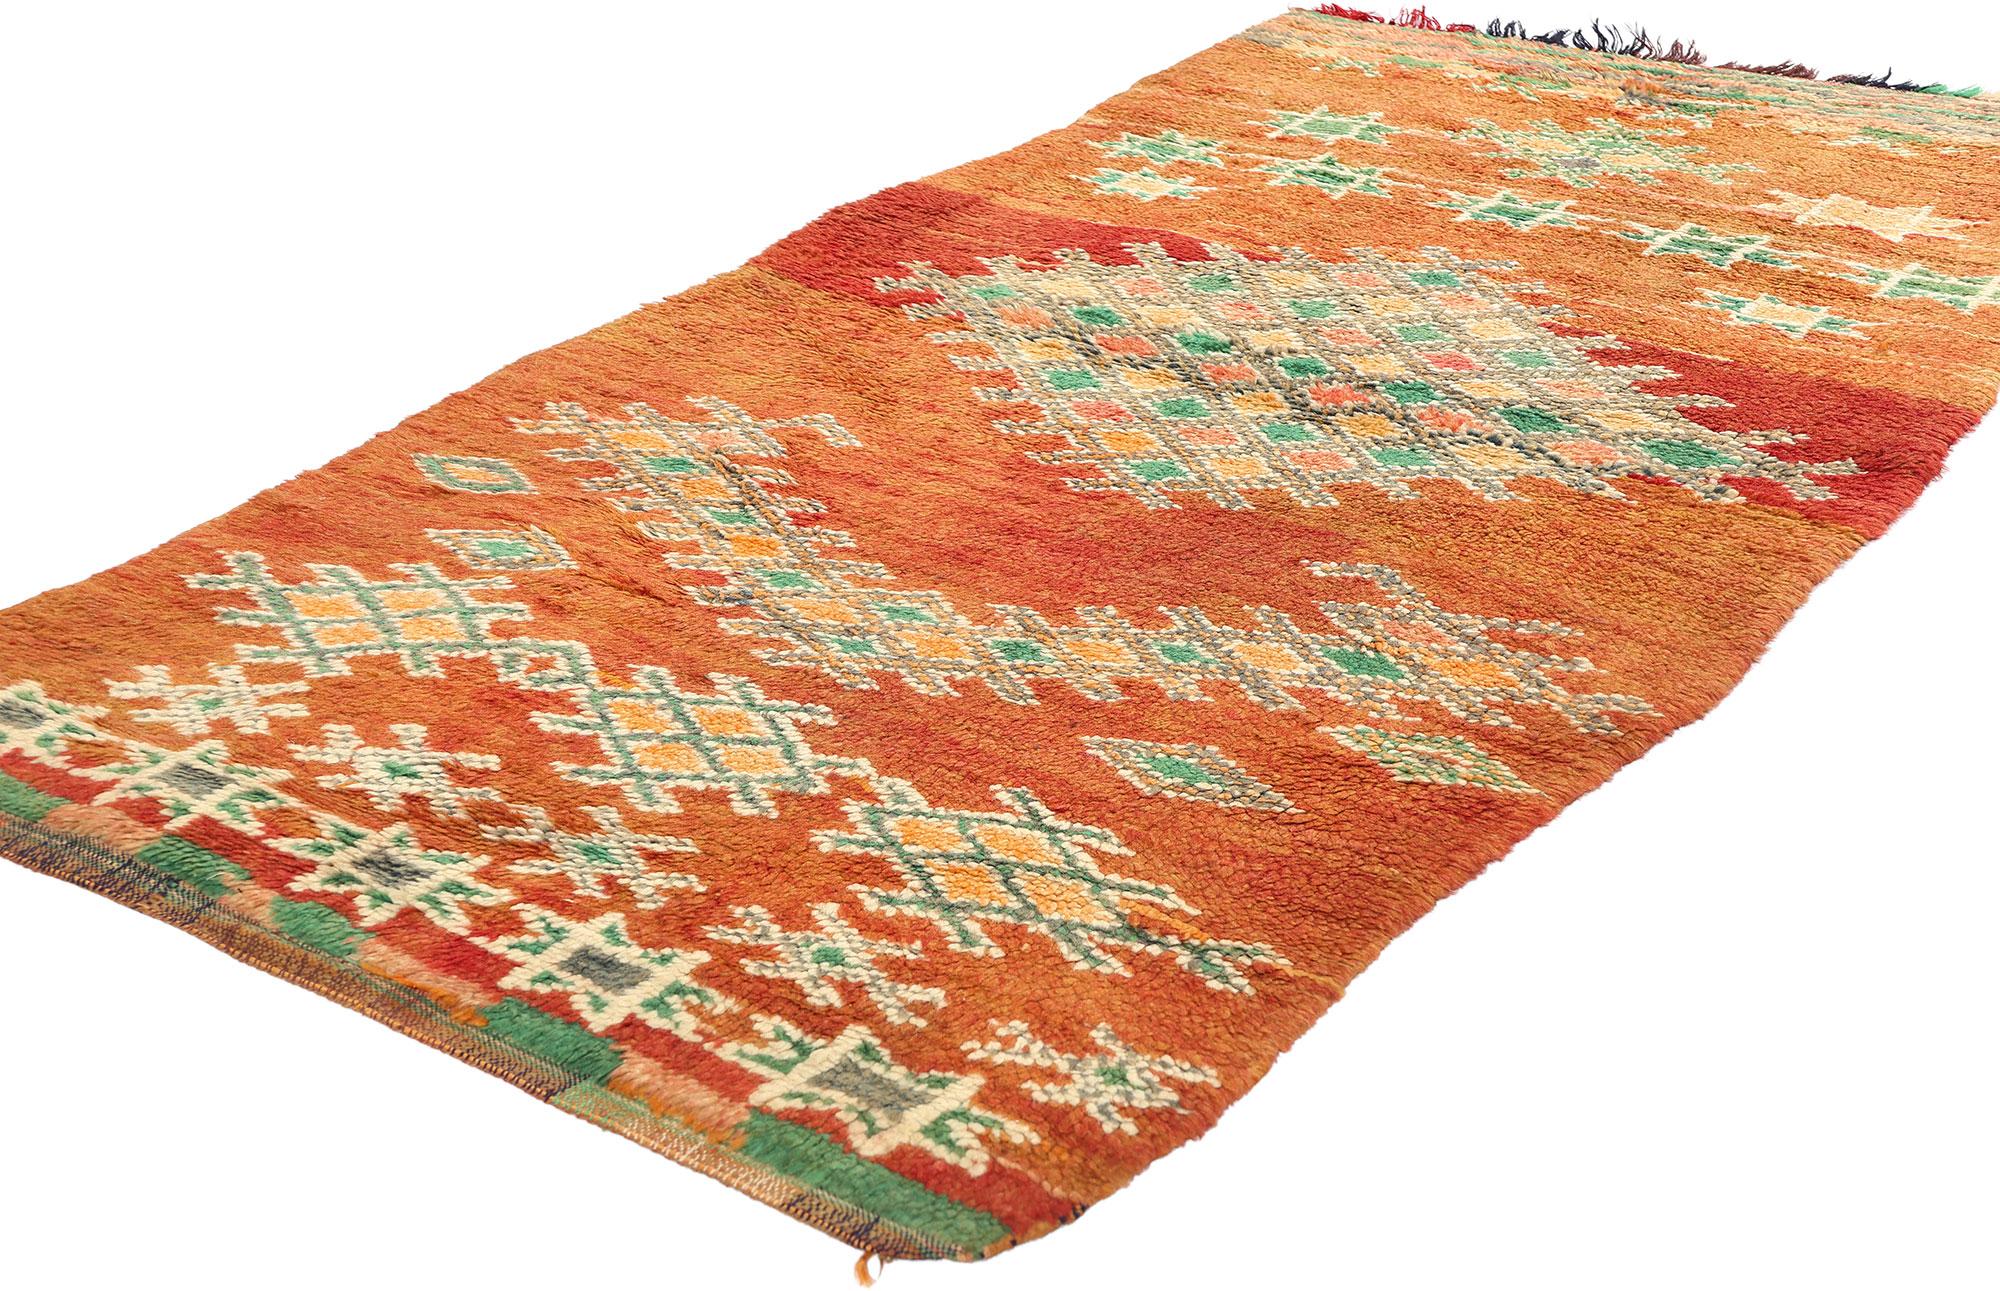 21839 Vintage Orange Boujad Moroccan Rug, 03'02 x 06'11. Boujad rugs, originating from Morocco's Boujad region, are exquisite handwoven masterpieces that embody the vibrant artistic heritage of Berber tribes, notably the Haouz and Rehamna. With